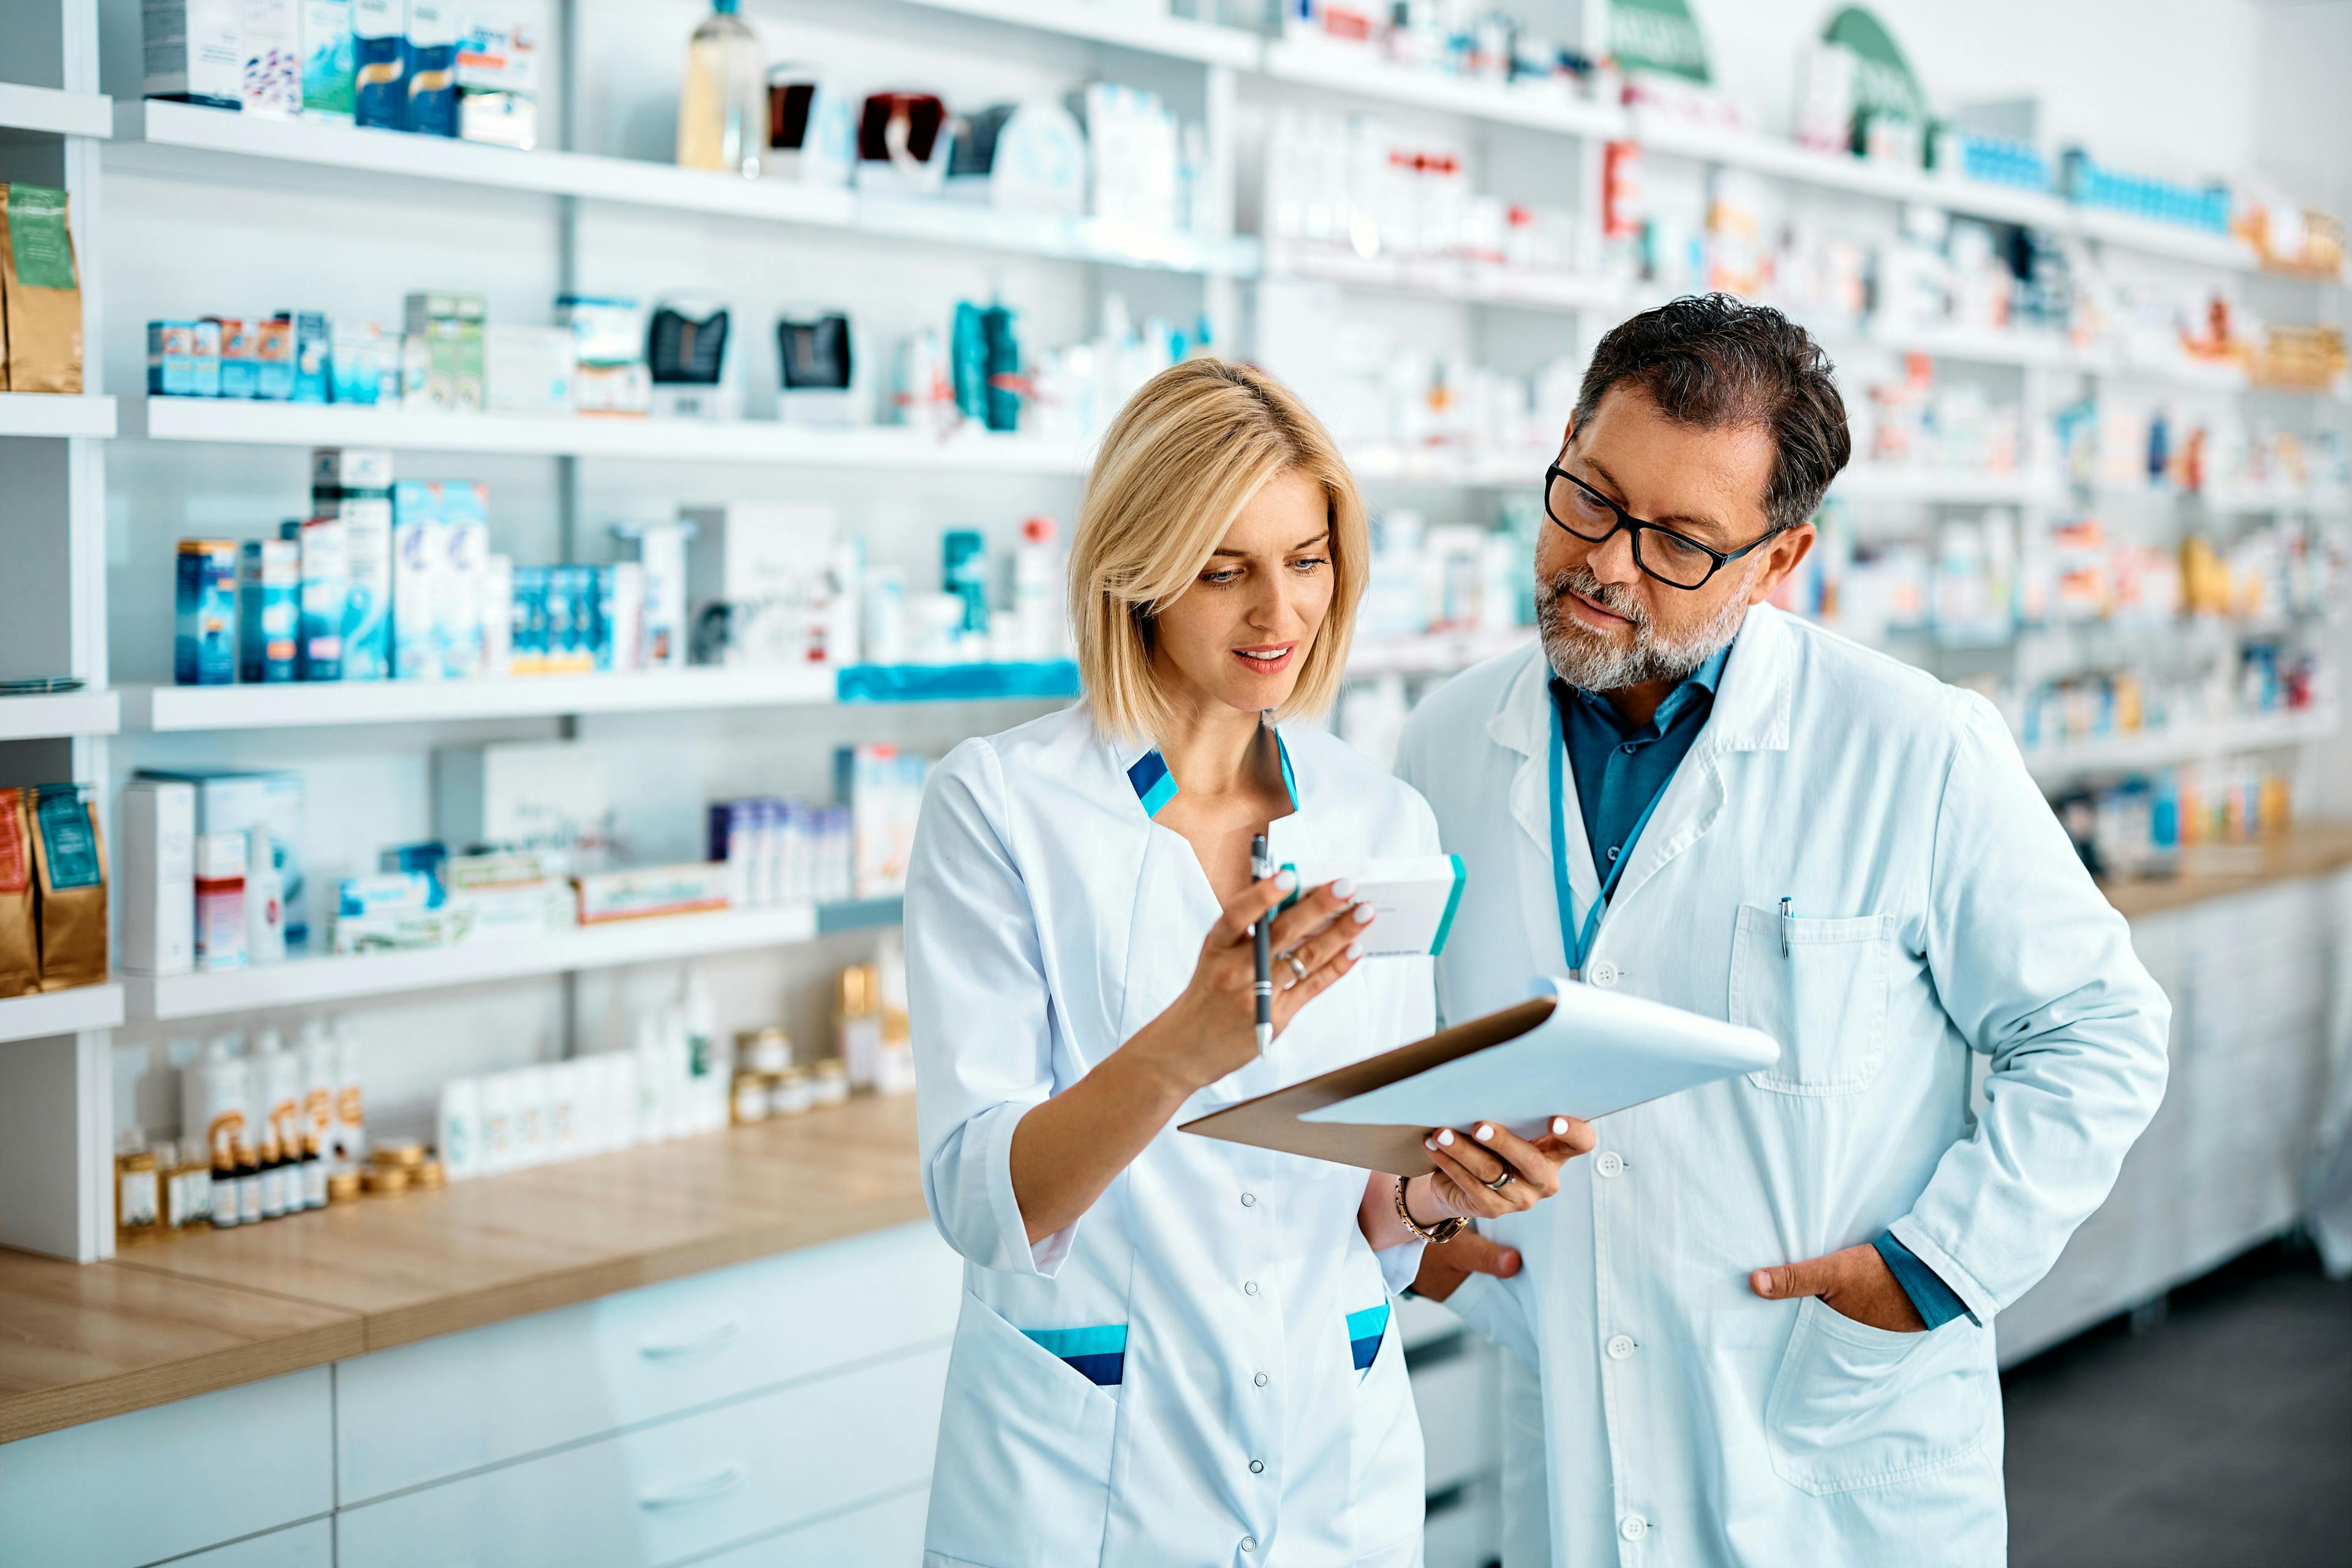 Female pharmacist and her male colleague checking inventory while working in pharmacy. | Image Credit: Drazen - stock.adobe.com